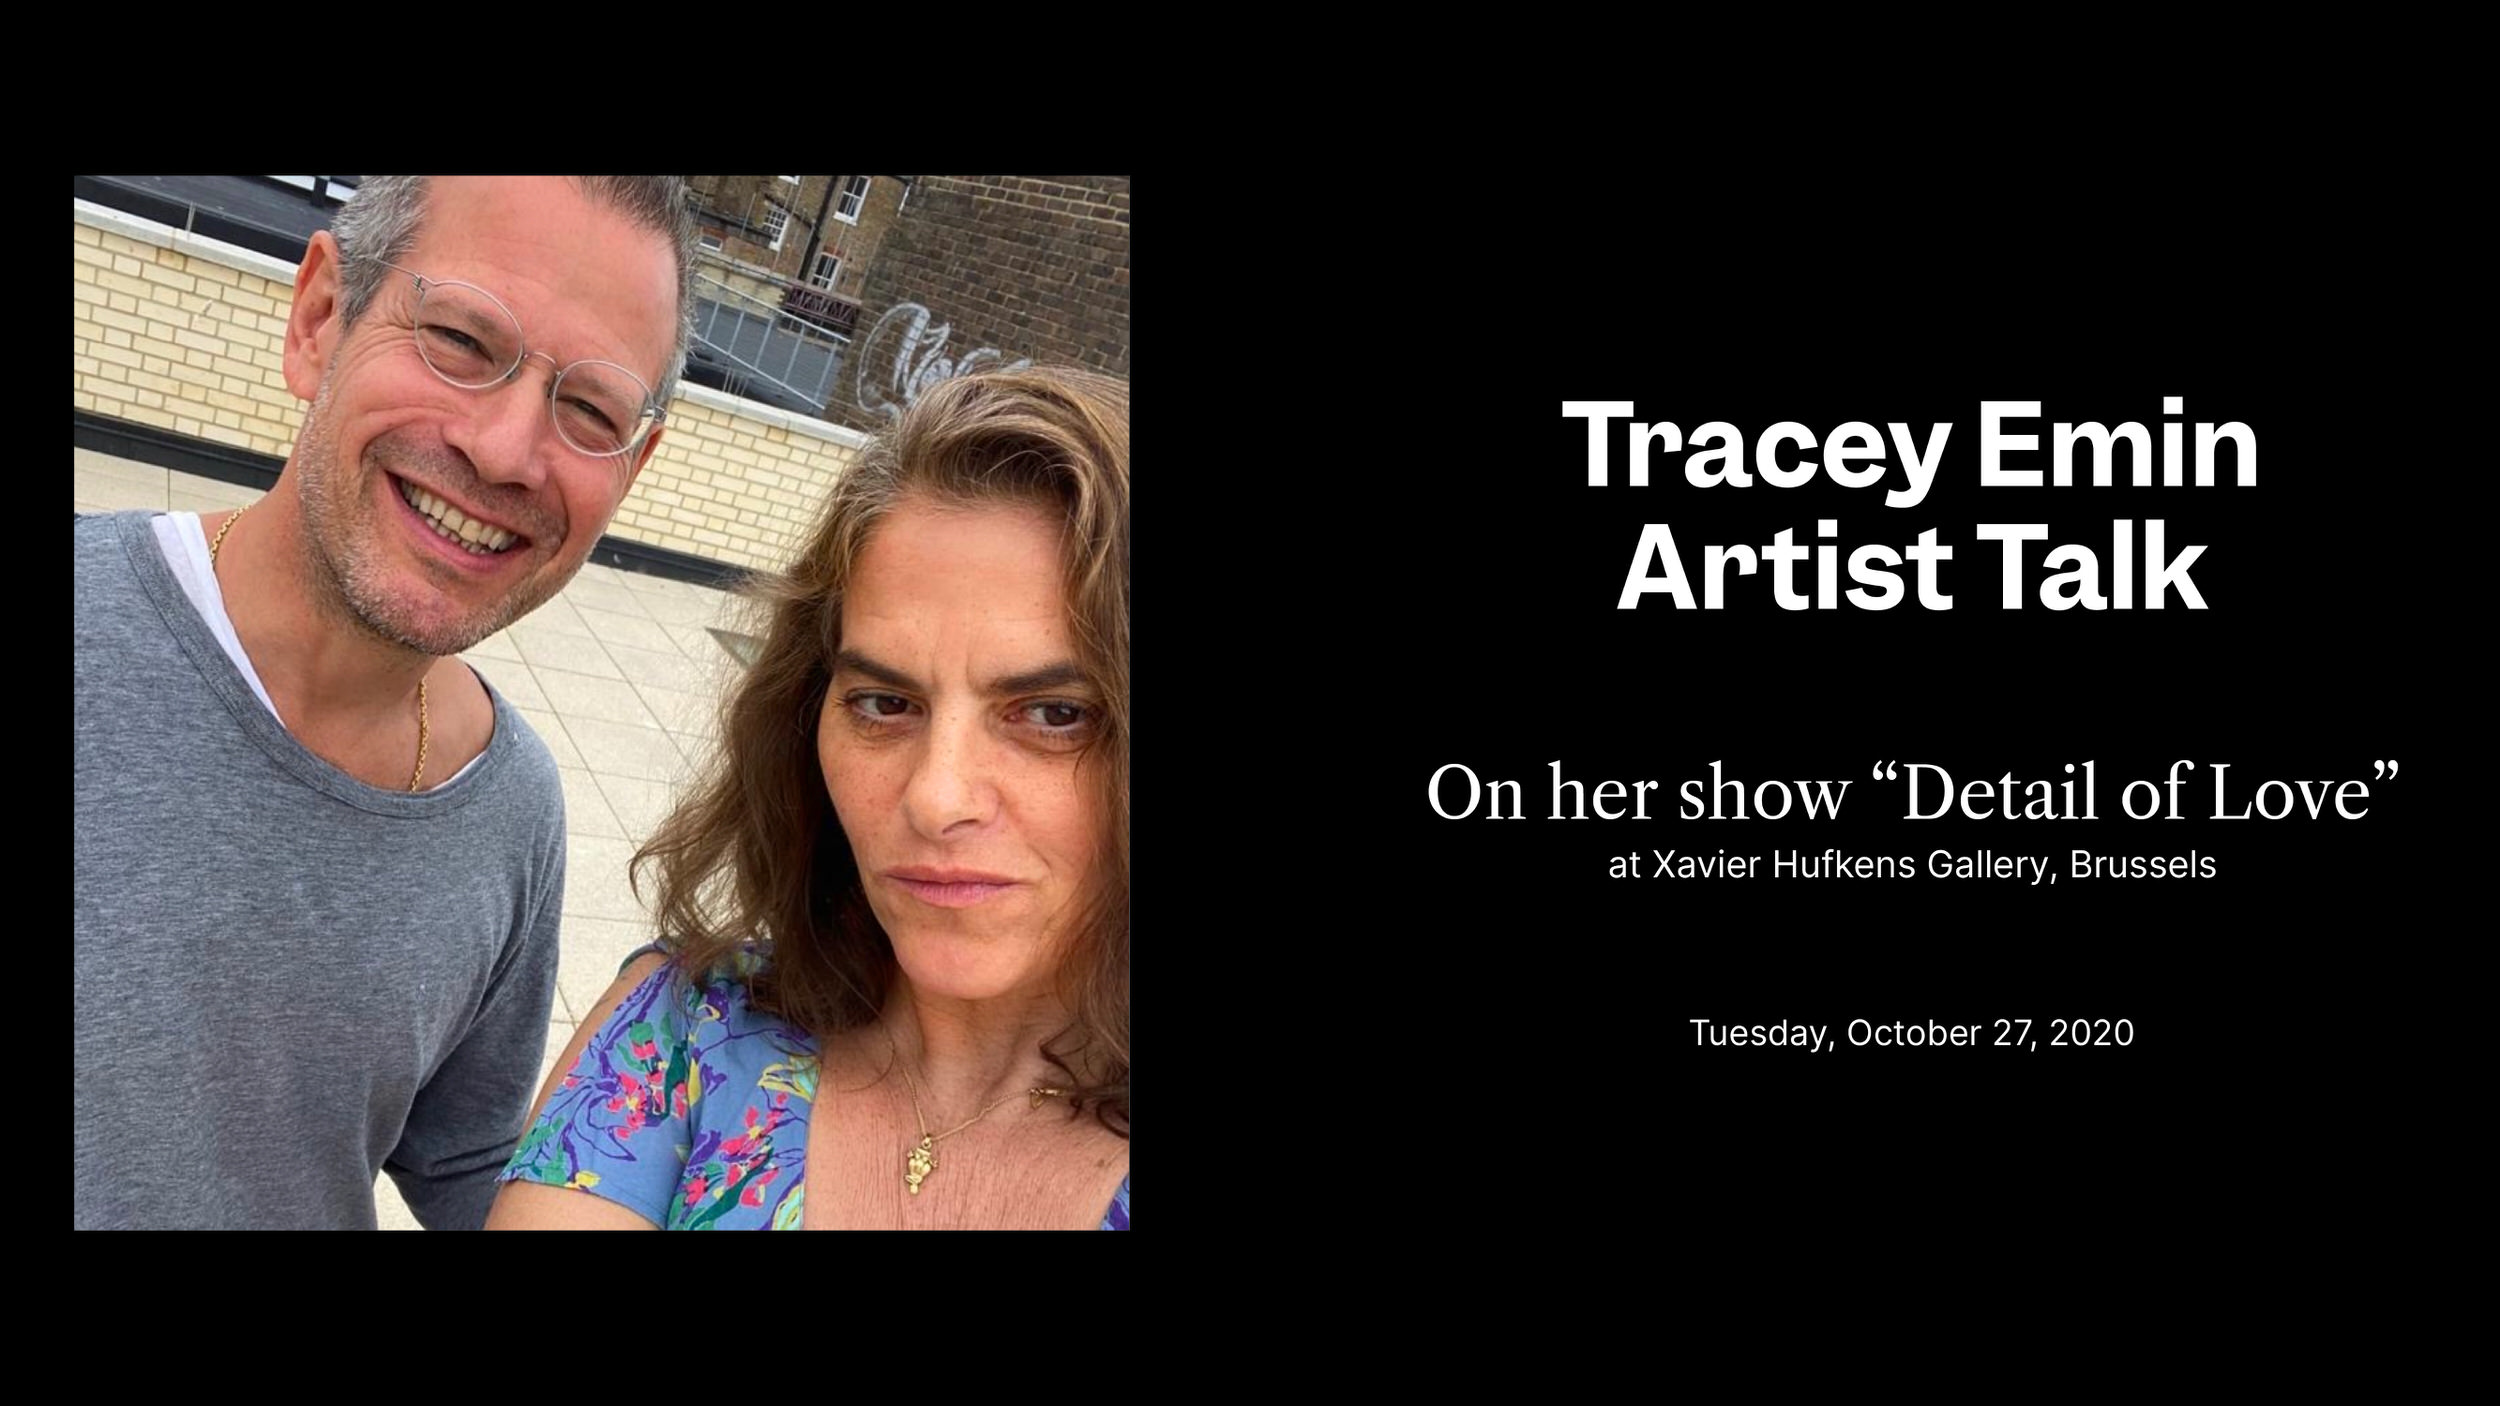 Tracey Emin Artist Talk on her show “Detail of Love”